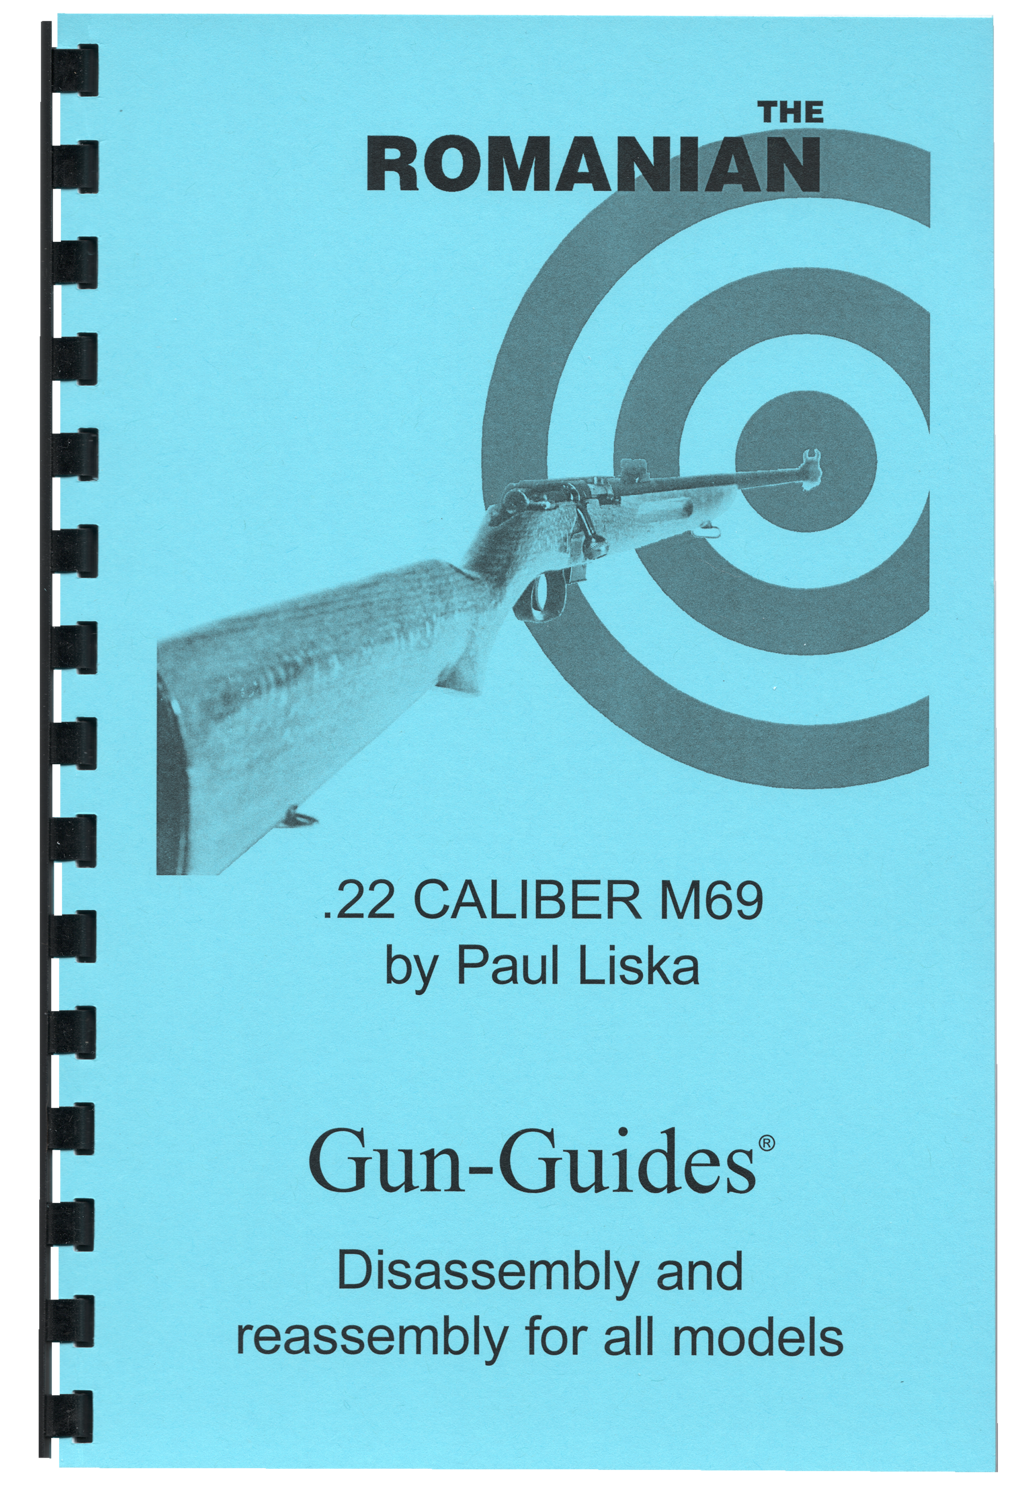 The Romanian .22 Caliber M69. Gun-Guides® Disassembly & Reassembly for All Models